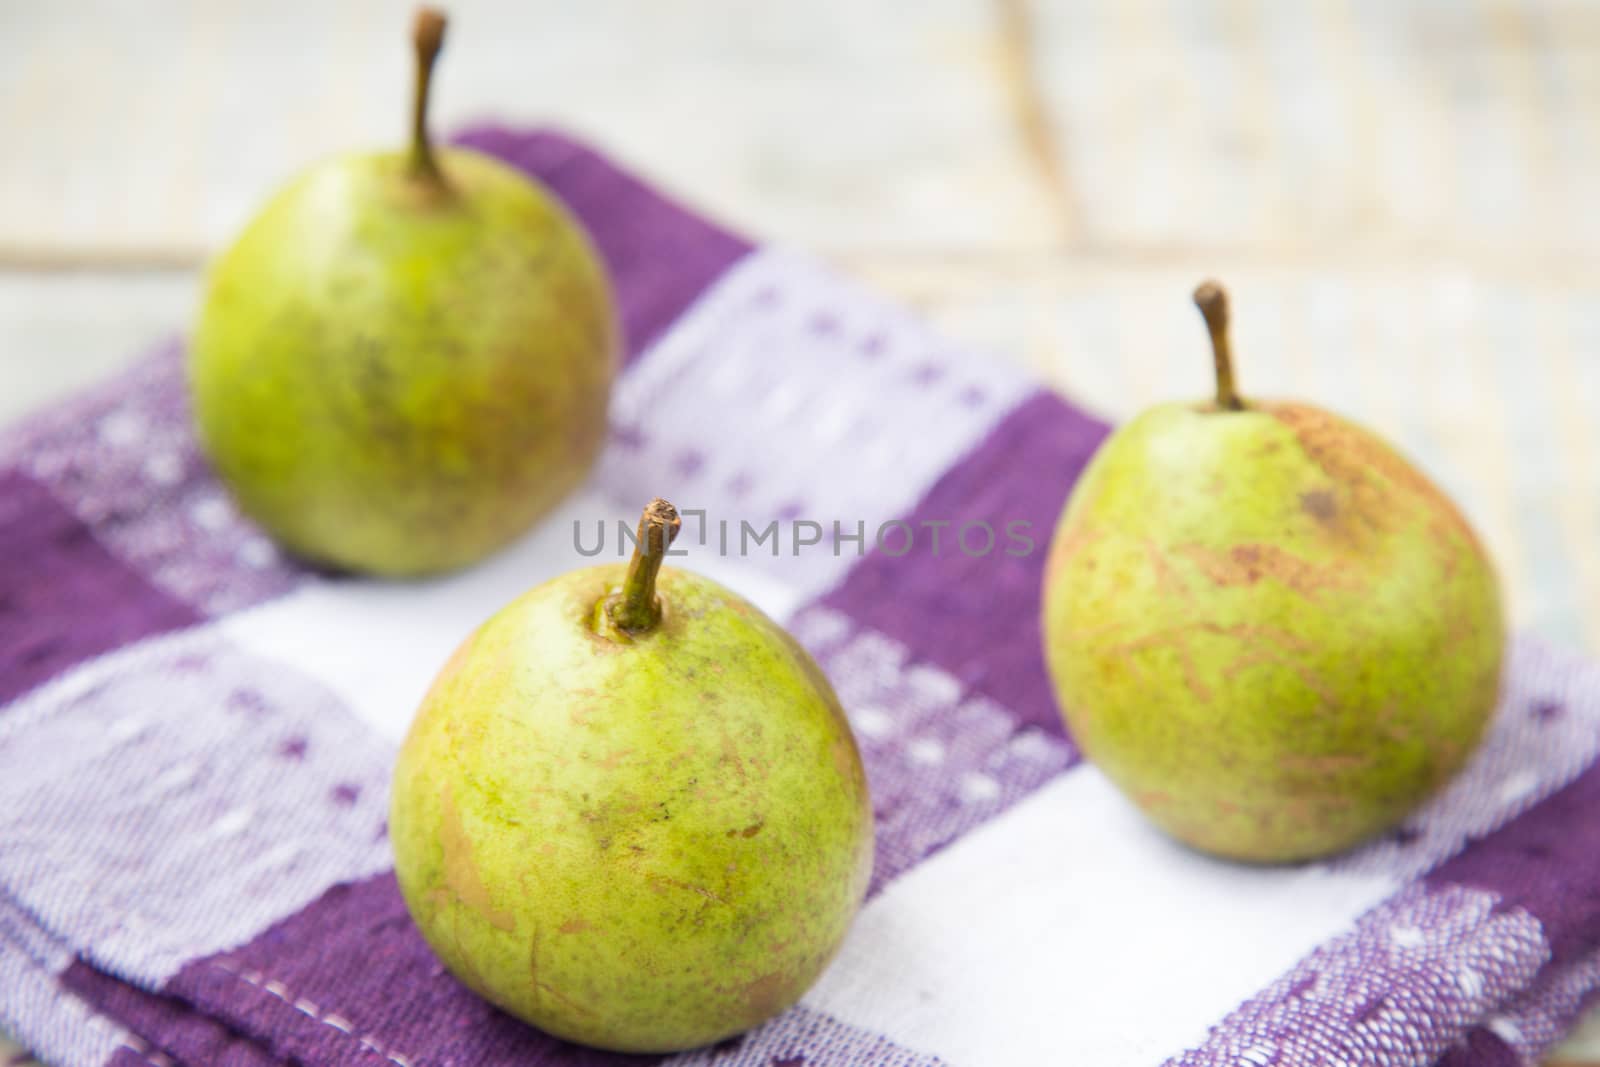 few fresh ripe pears are on a wooden surface